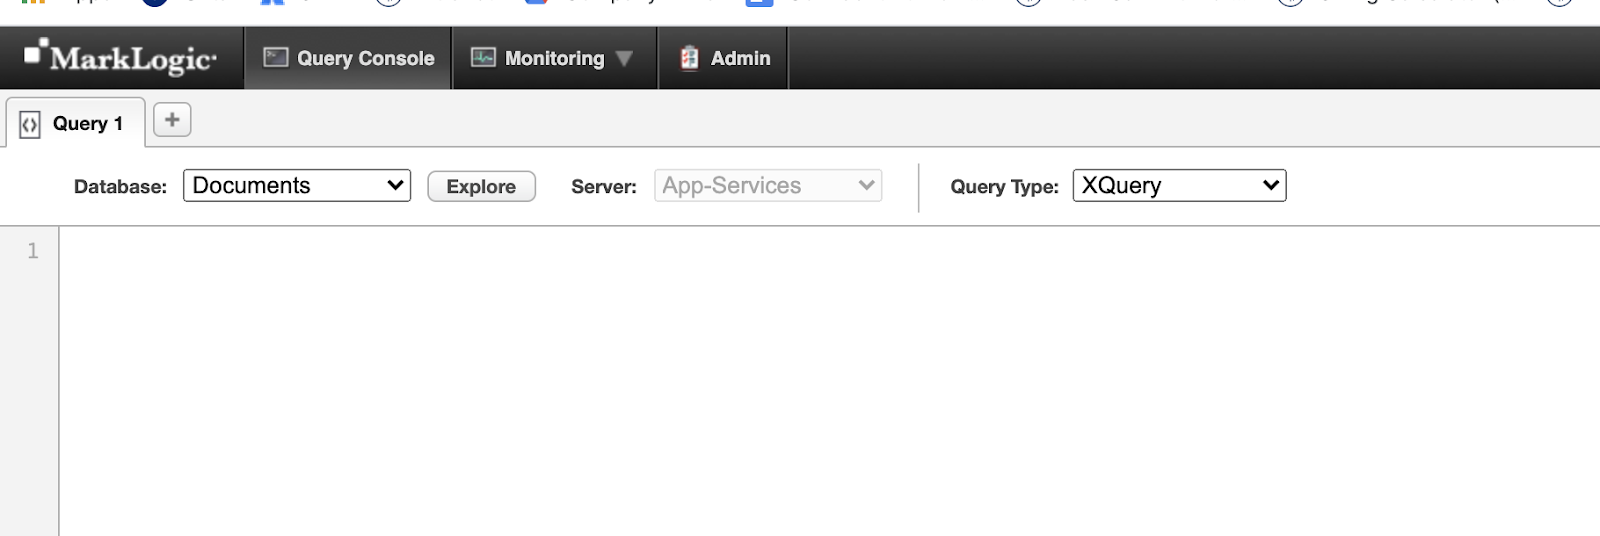 MarkLogic Query Console running on AWS